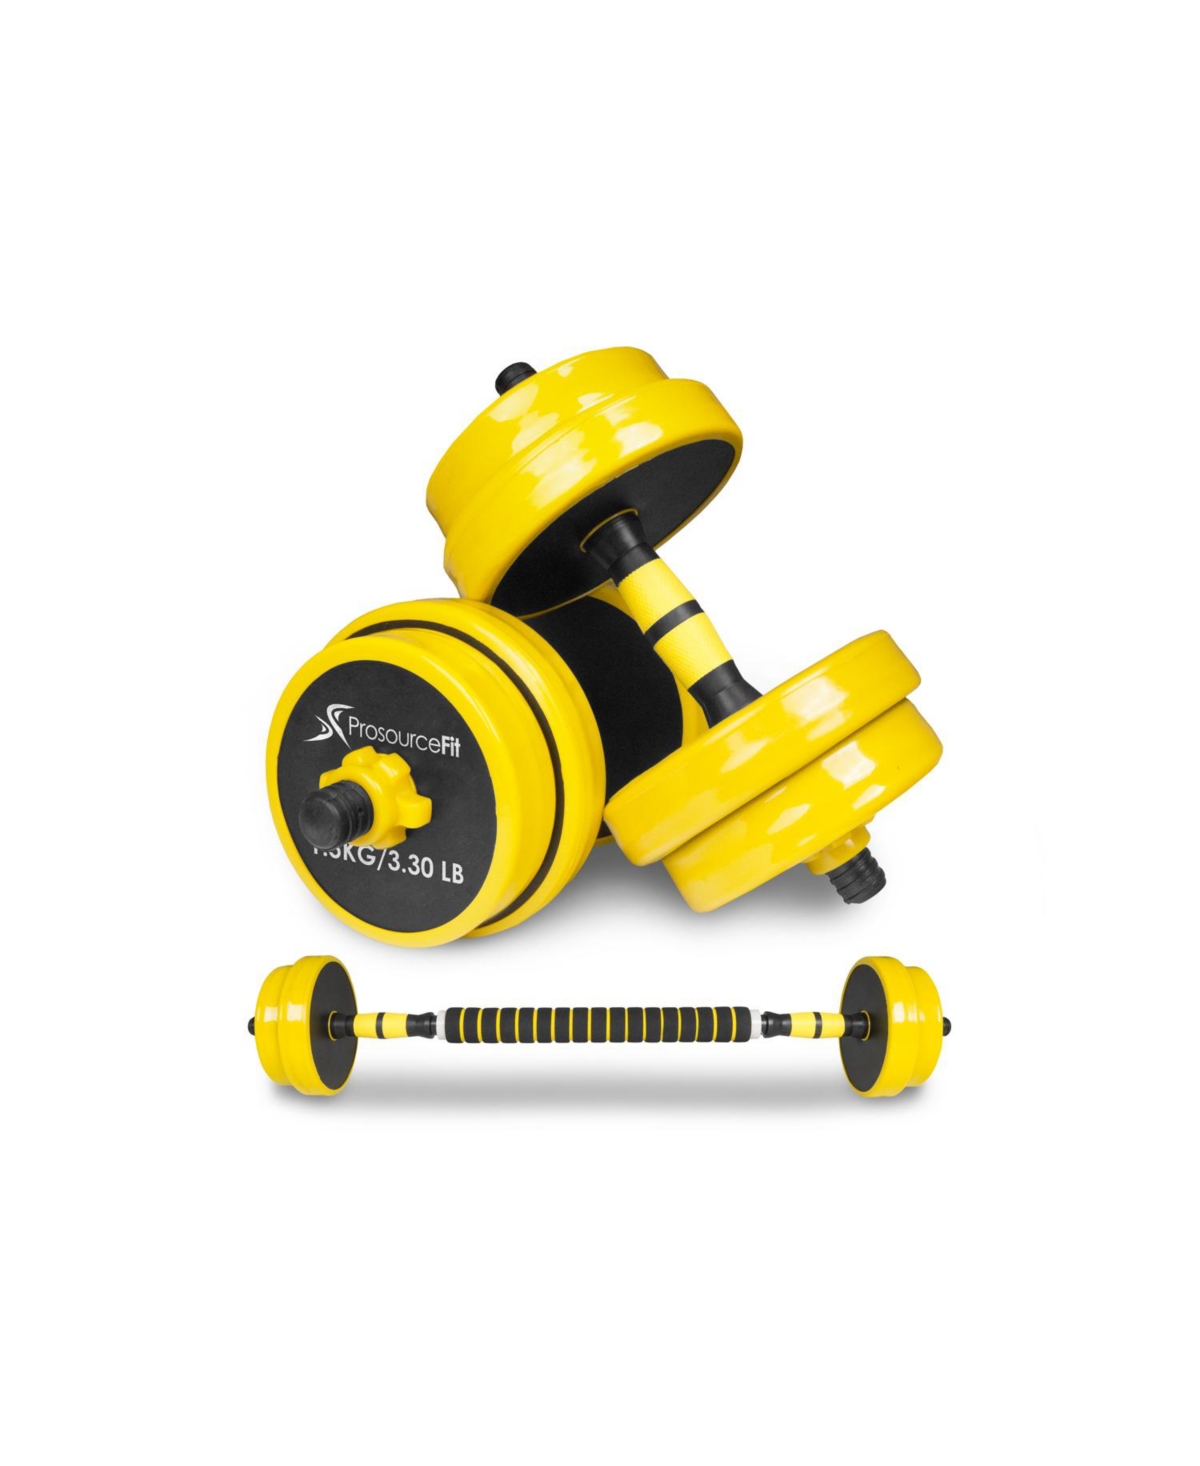 Adjustable Dumbbells and Barbell Set, 33lb - Black/yellow